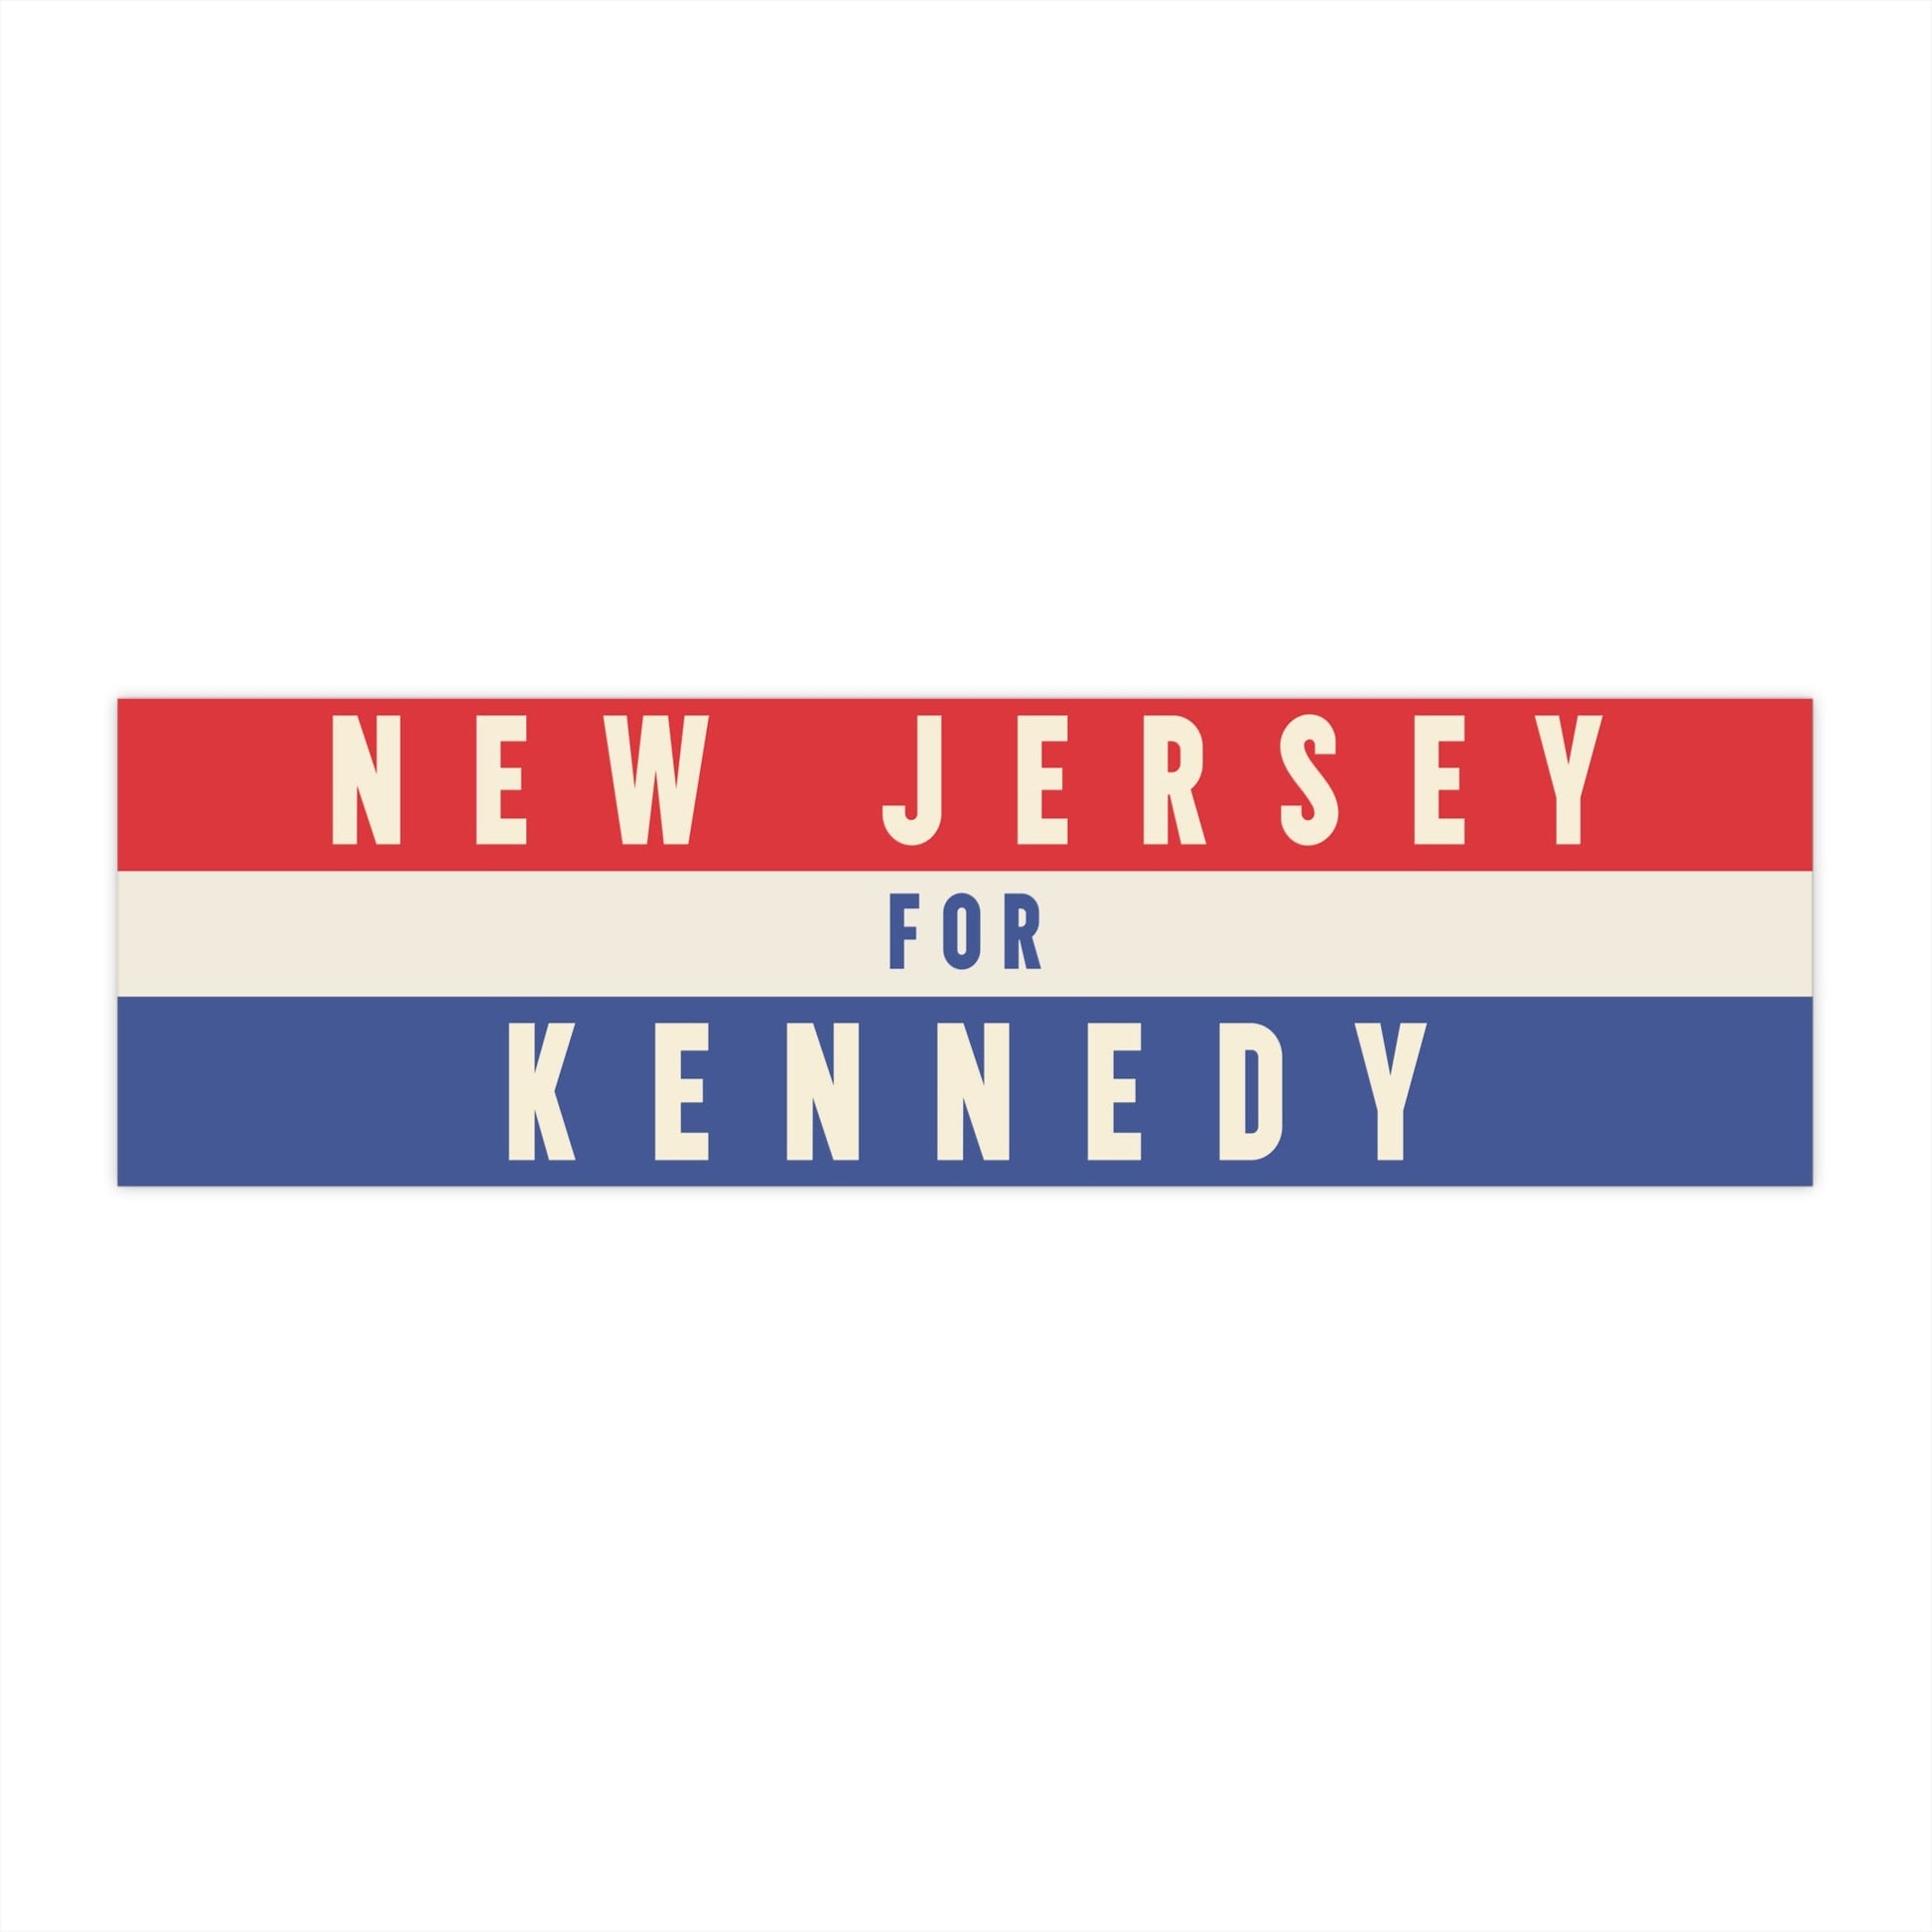 New Jersey for Kennedy Bumper Sticker - TEAM KENNEDY. All rights reserved